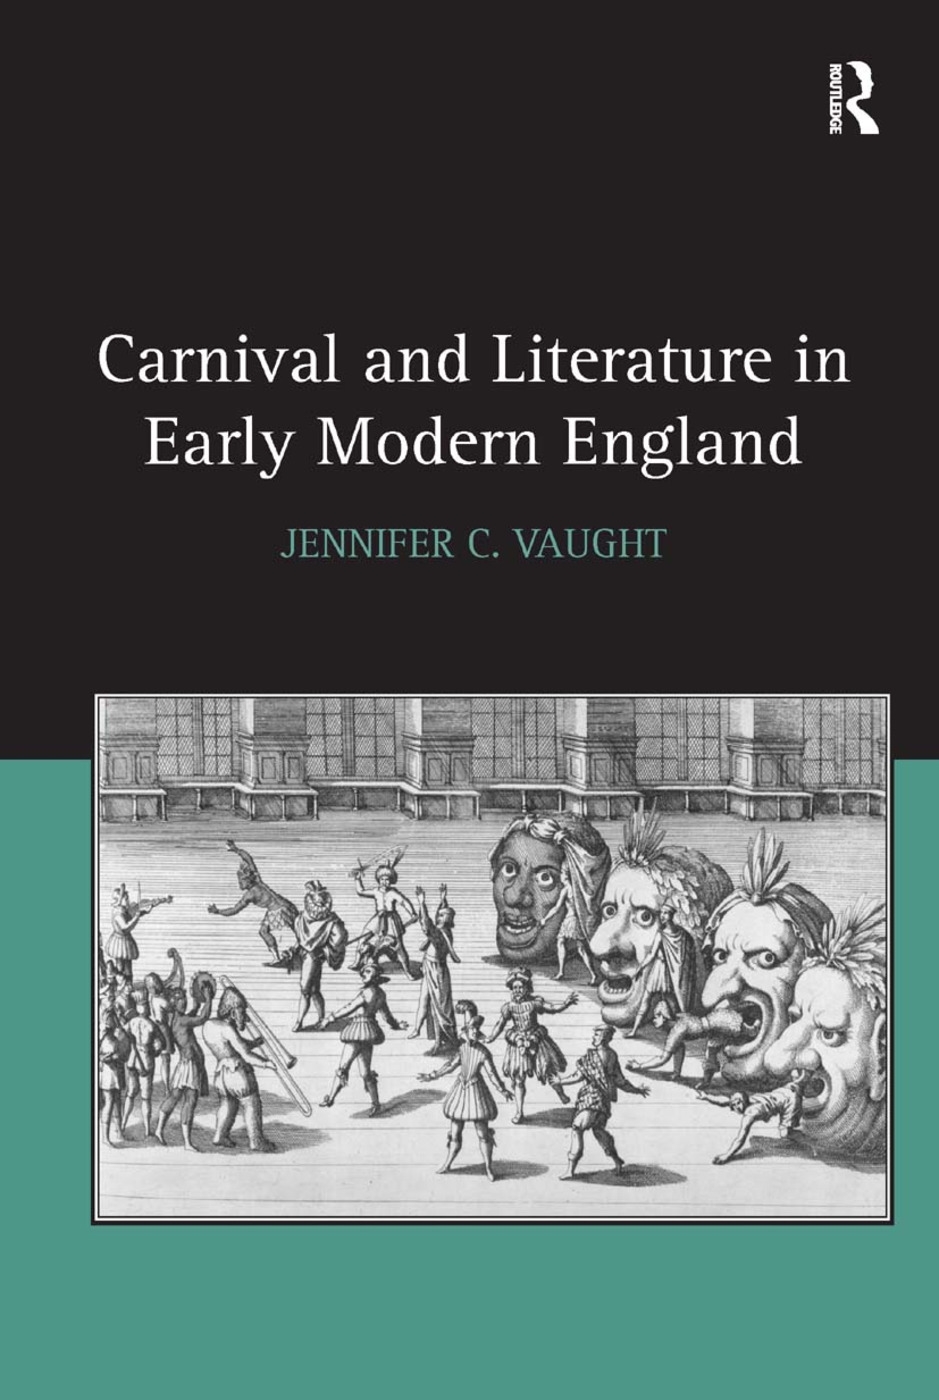 Carnival and Literature in Early Modern England. Jennifer C. Vaught